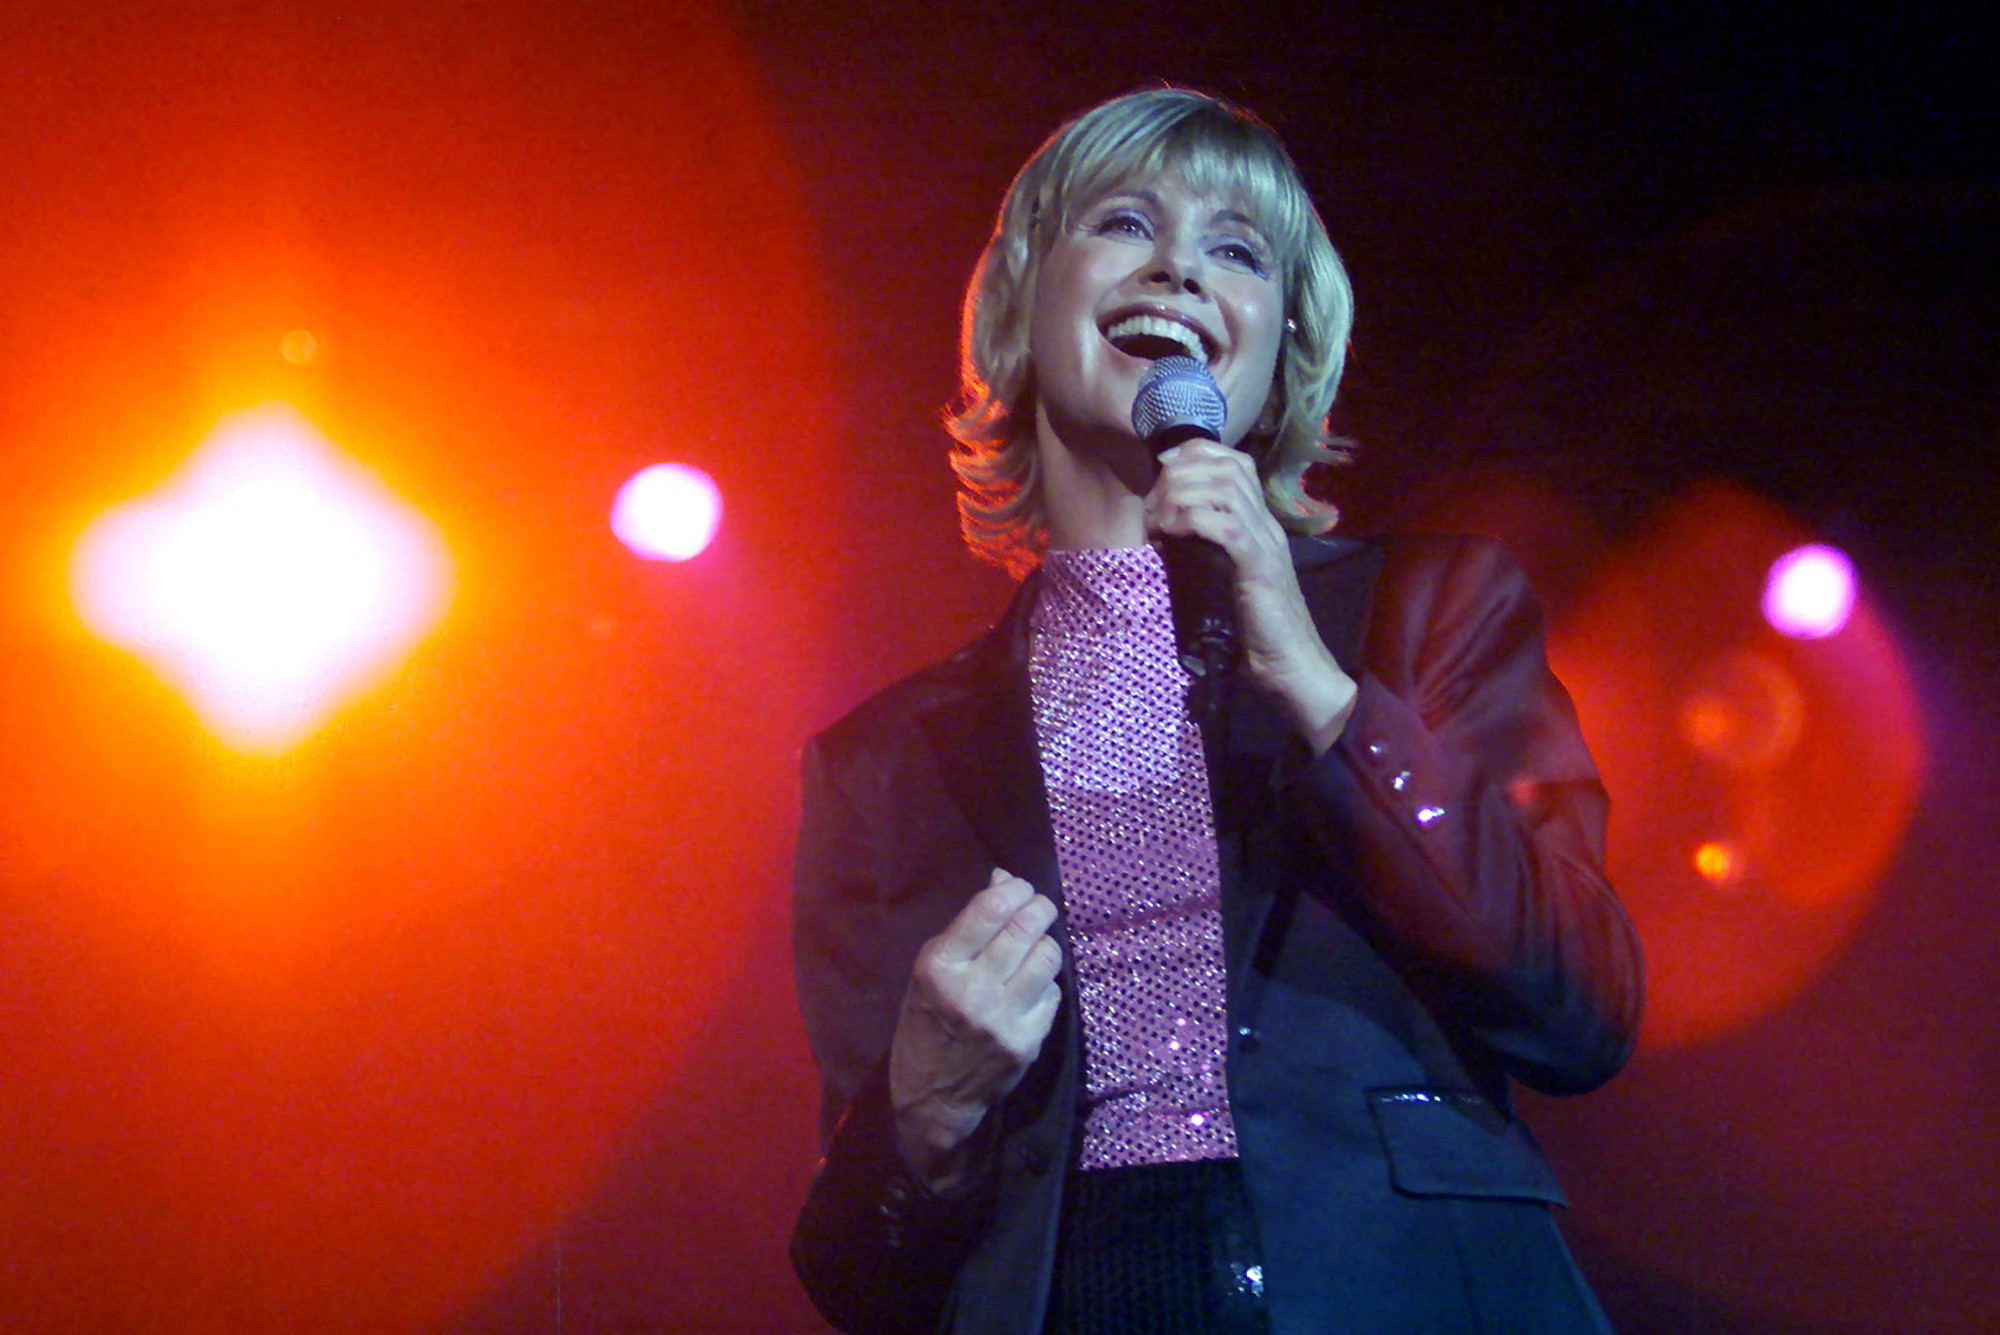 A woman with a blonde bob sings into the microphone.